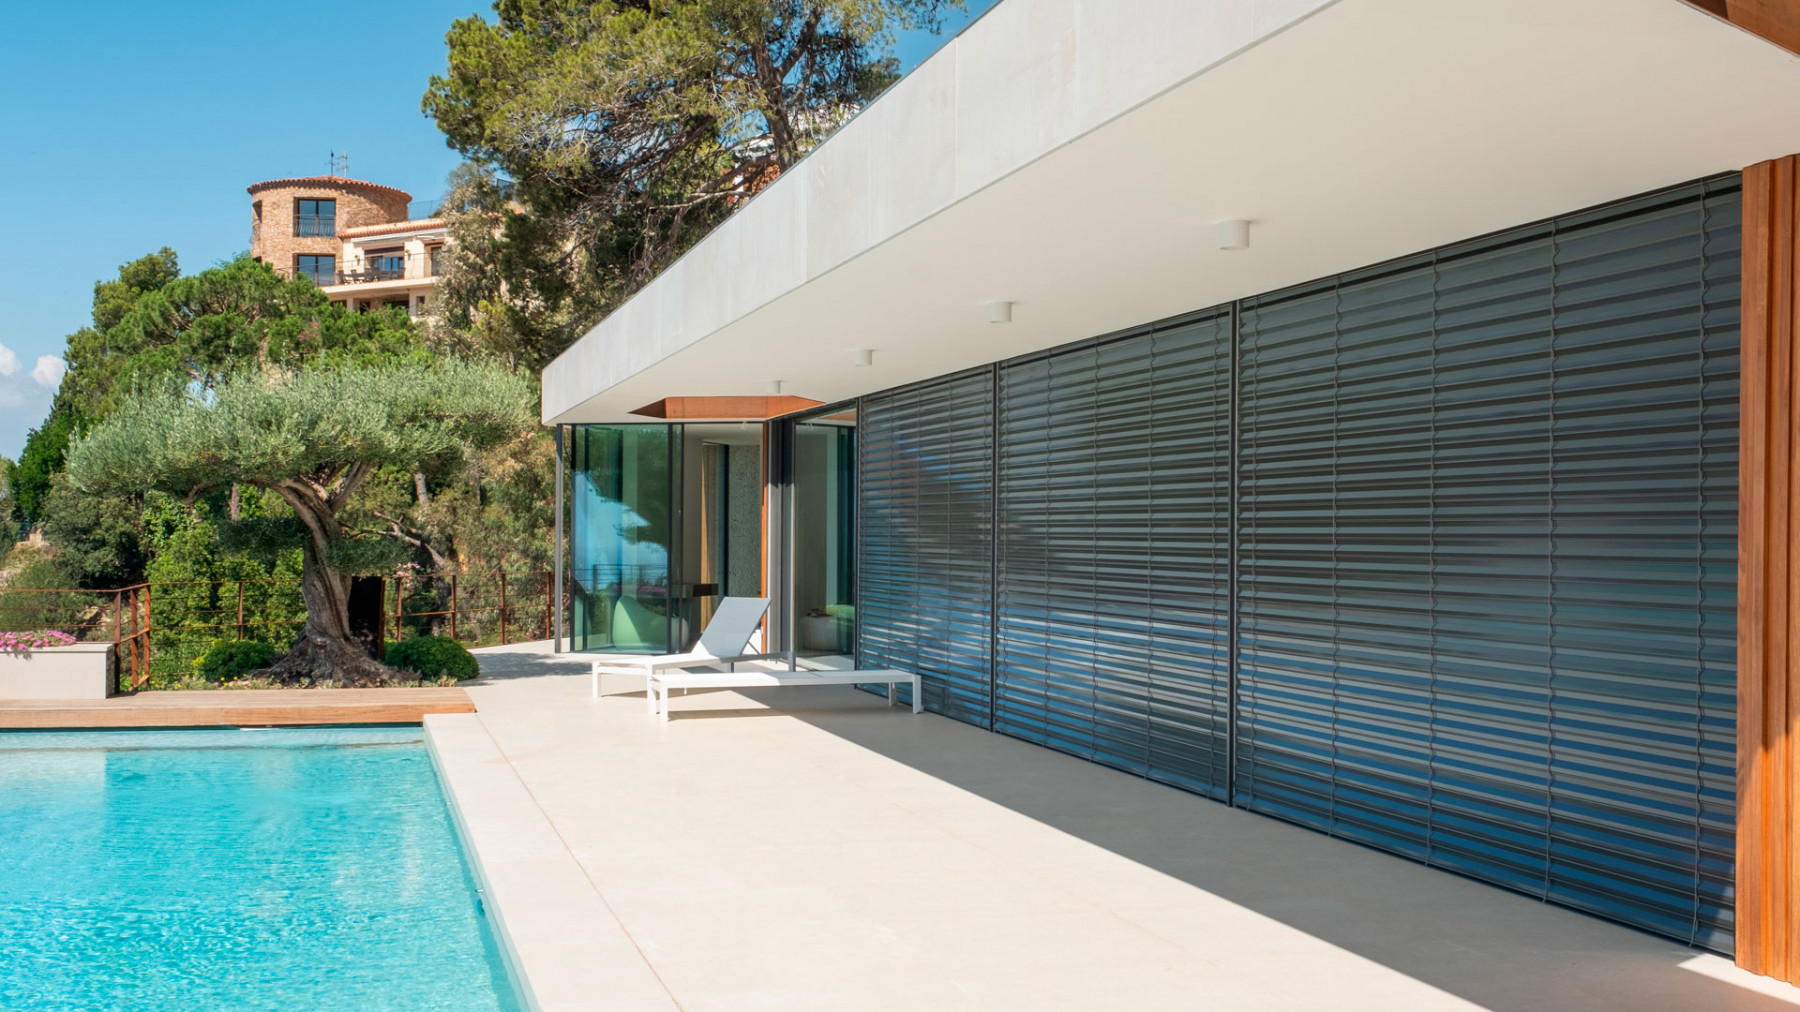 HOUSE WITH VIEWS IN BEGÚR, GIRONA